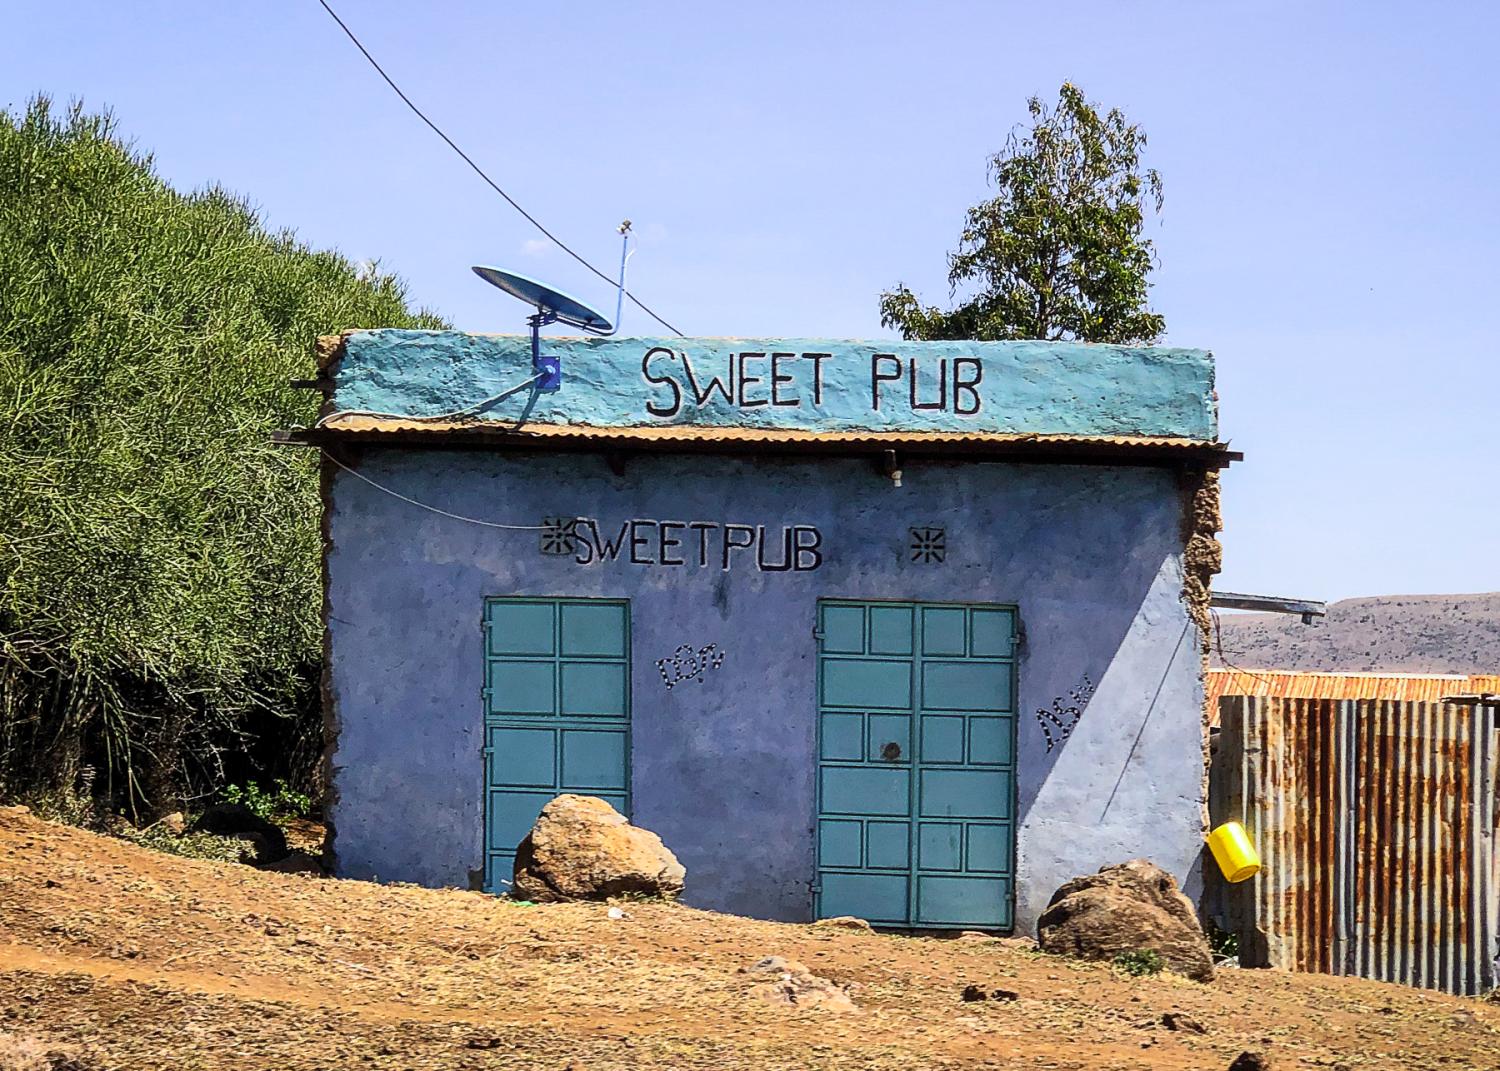 Storefronts in Kenya and Mississippi: Combining my Two Worlds